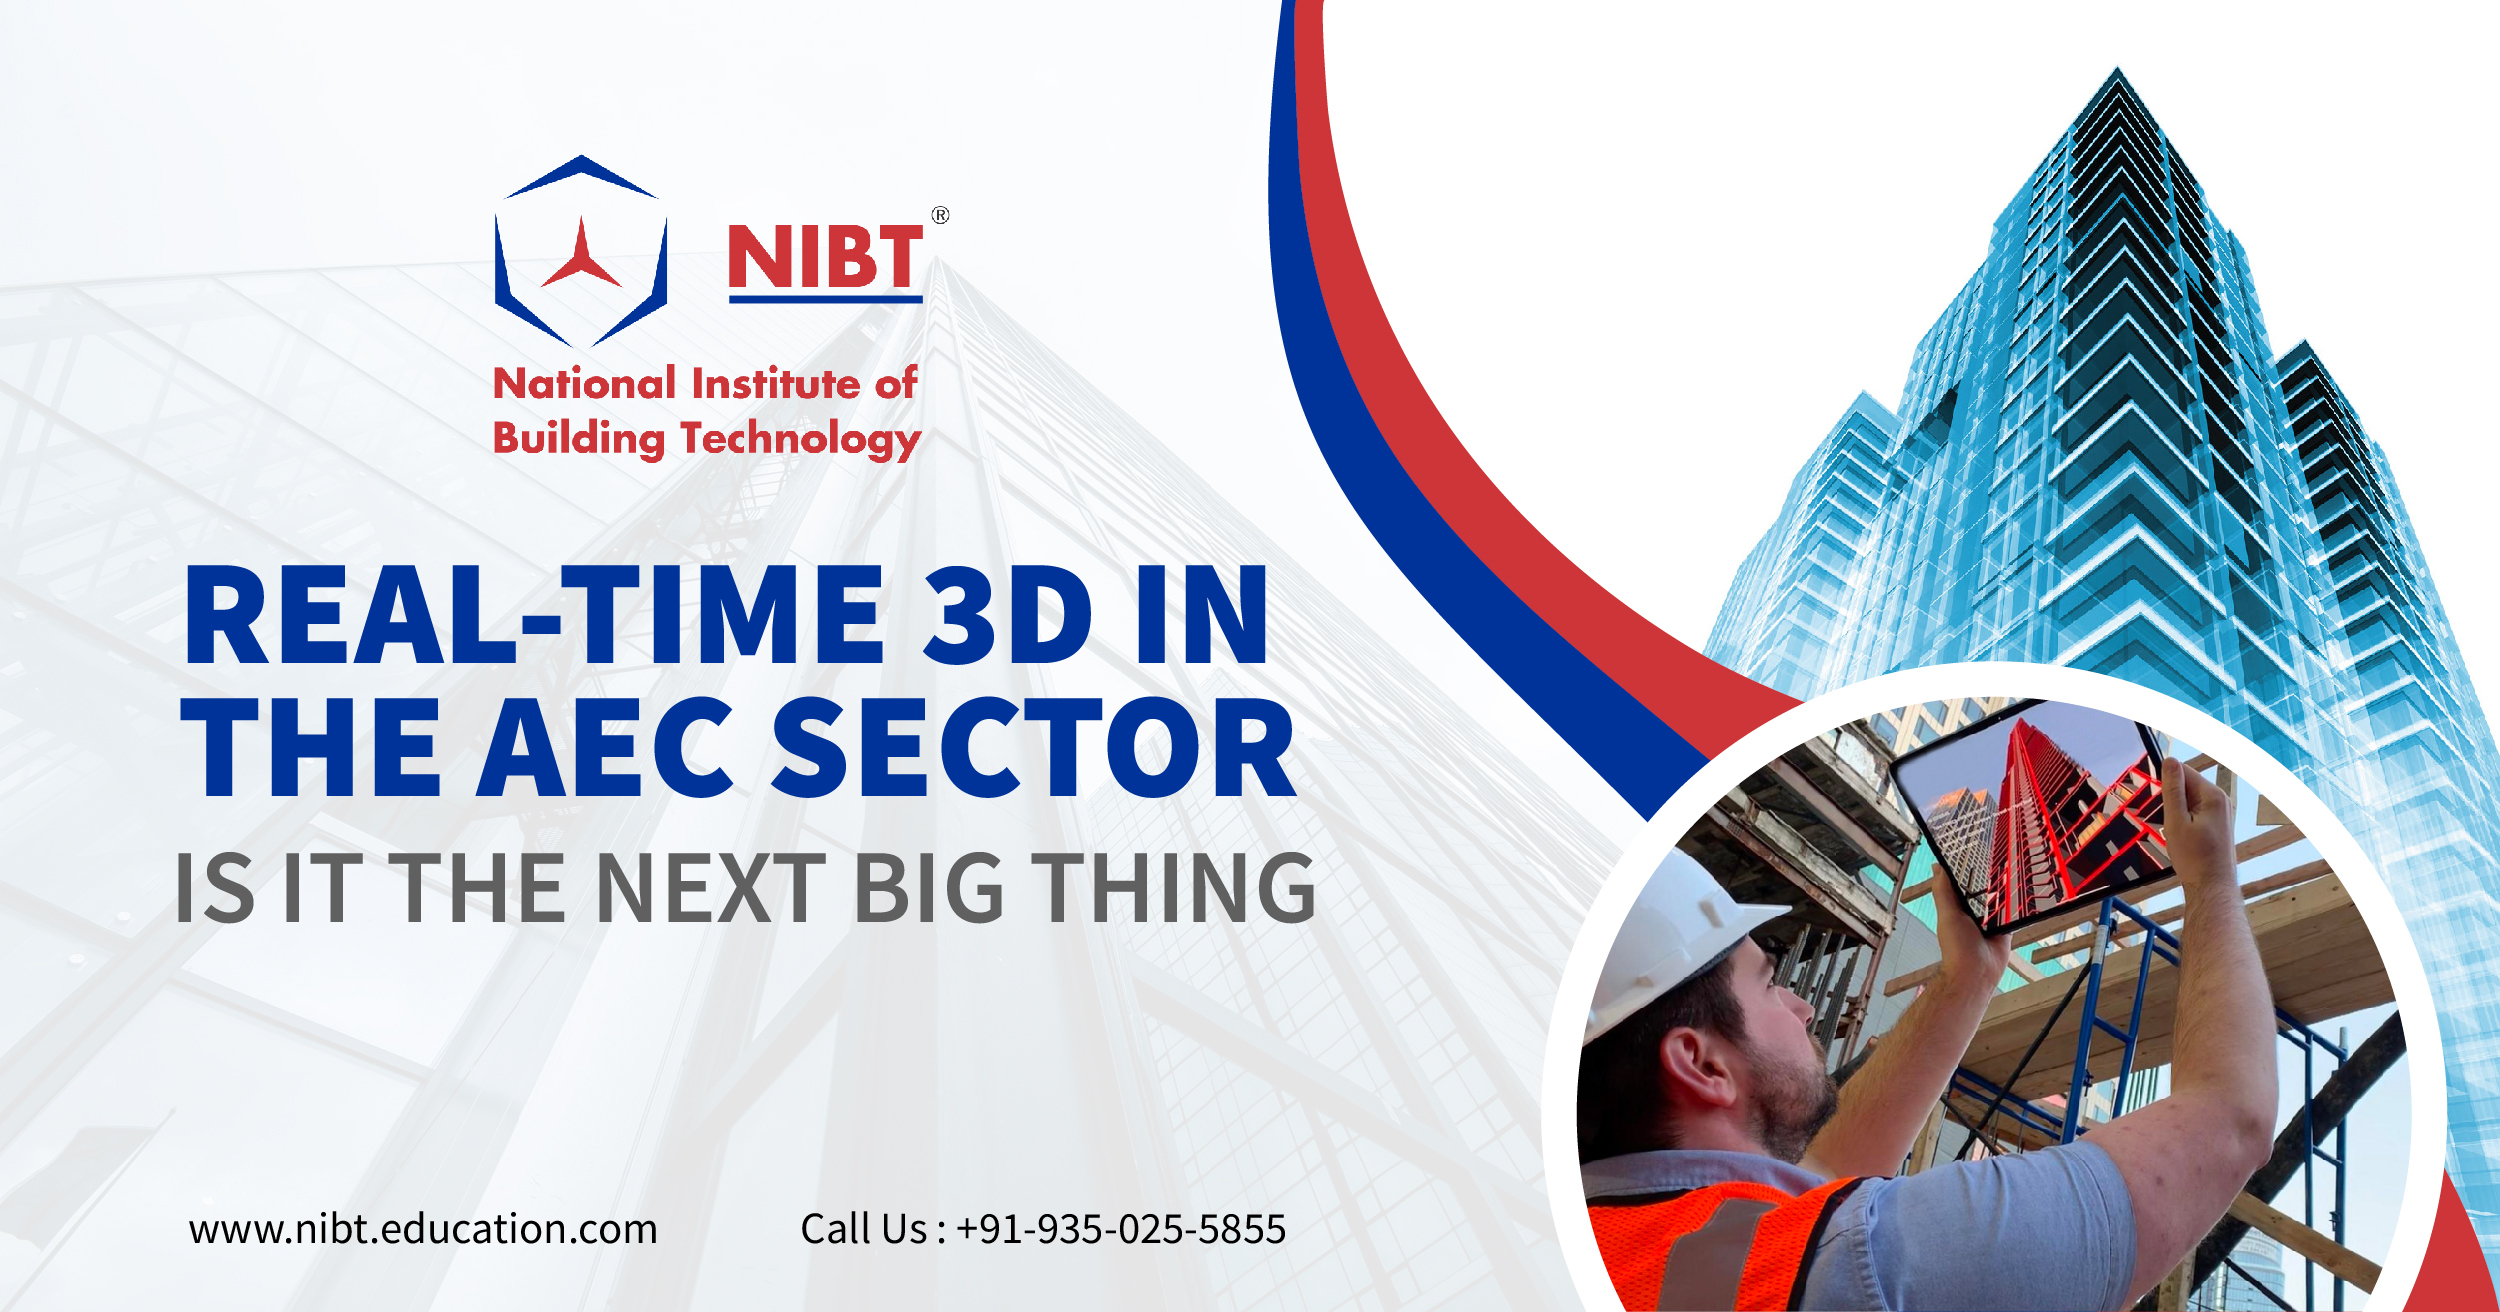 Uses of NIBT - Real-time 3D in Construction